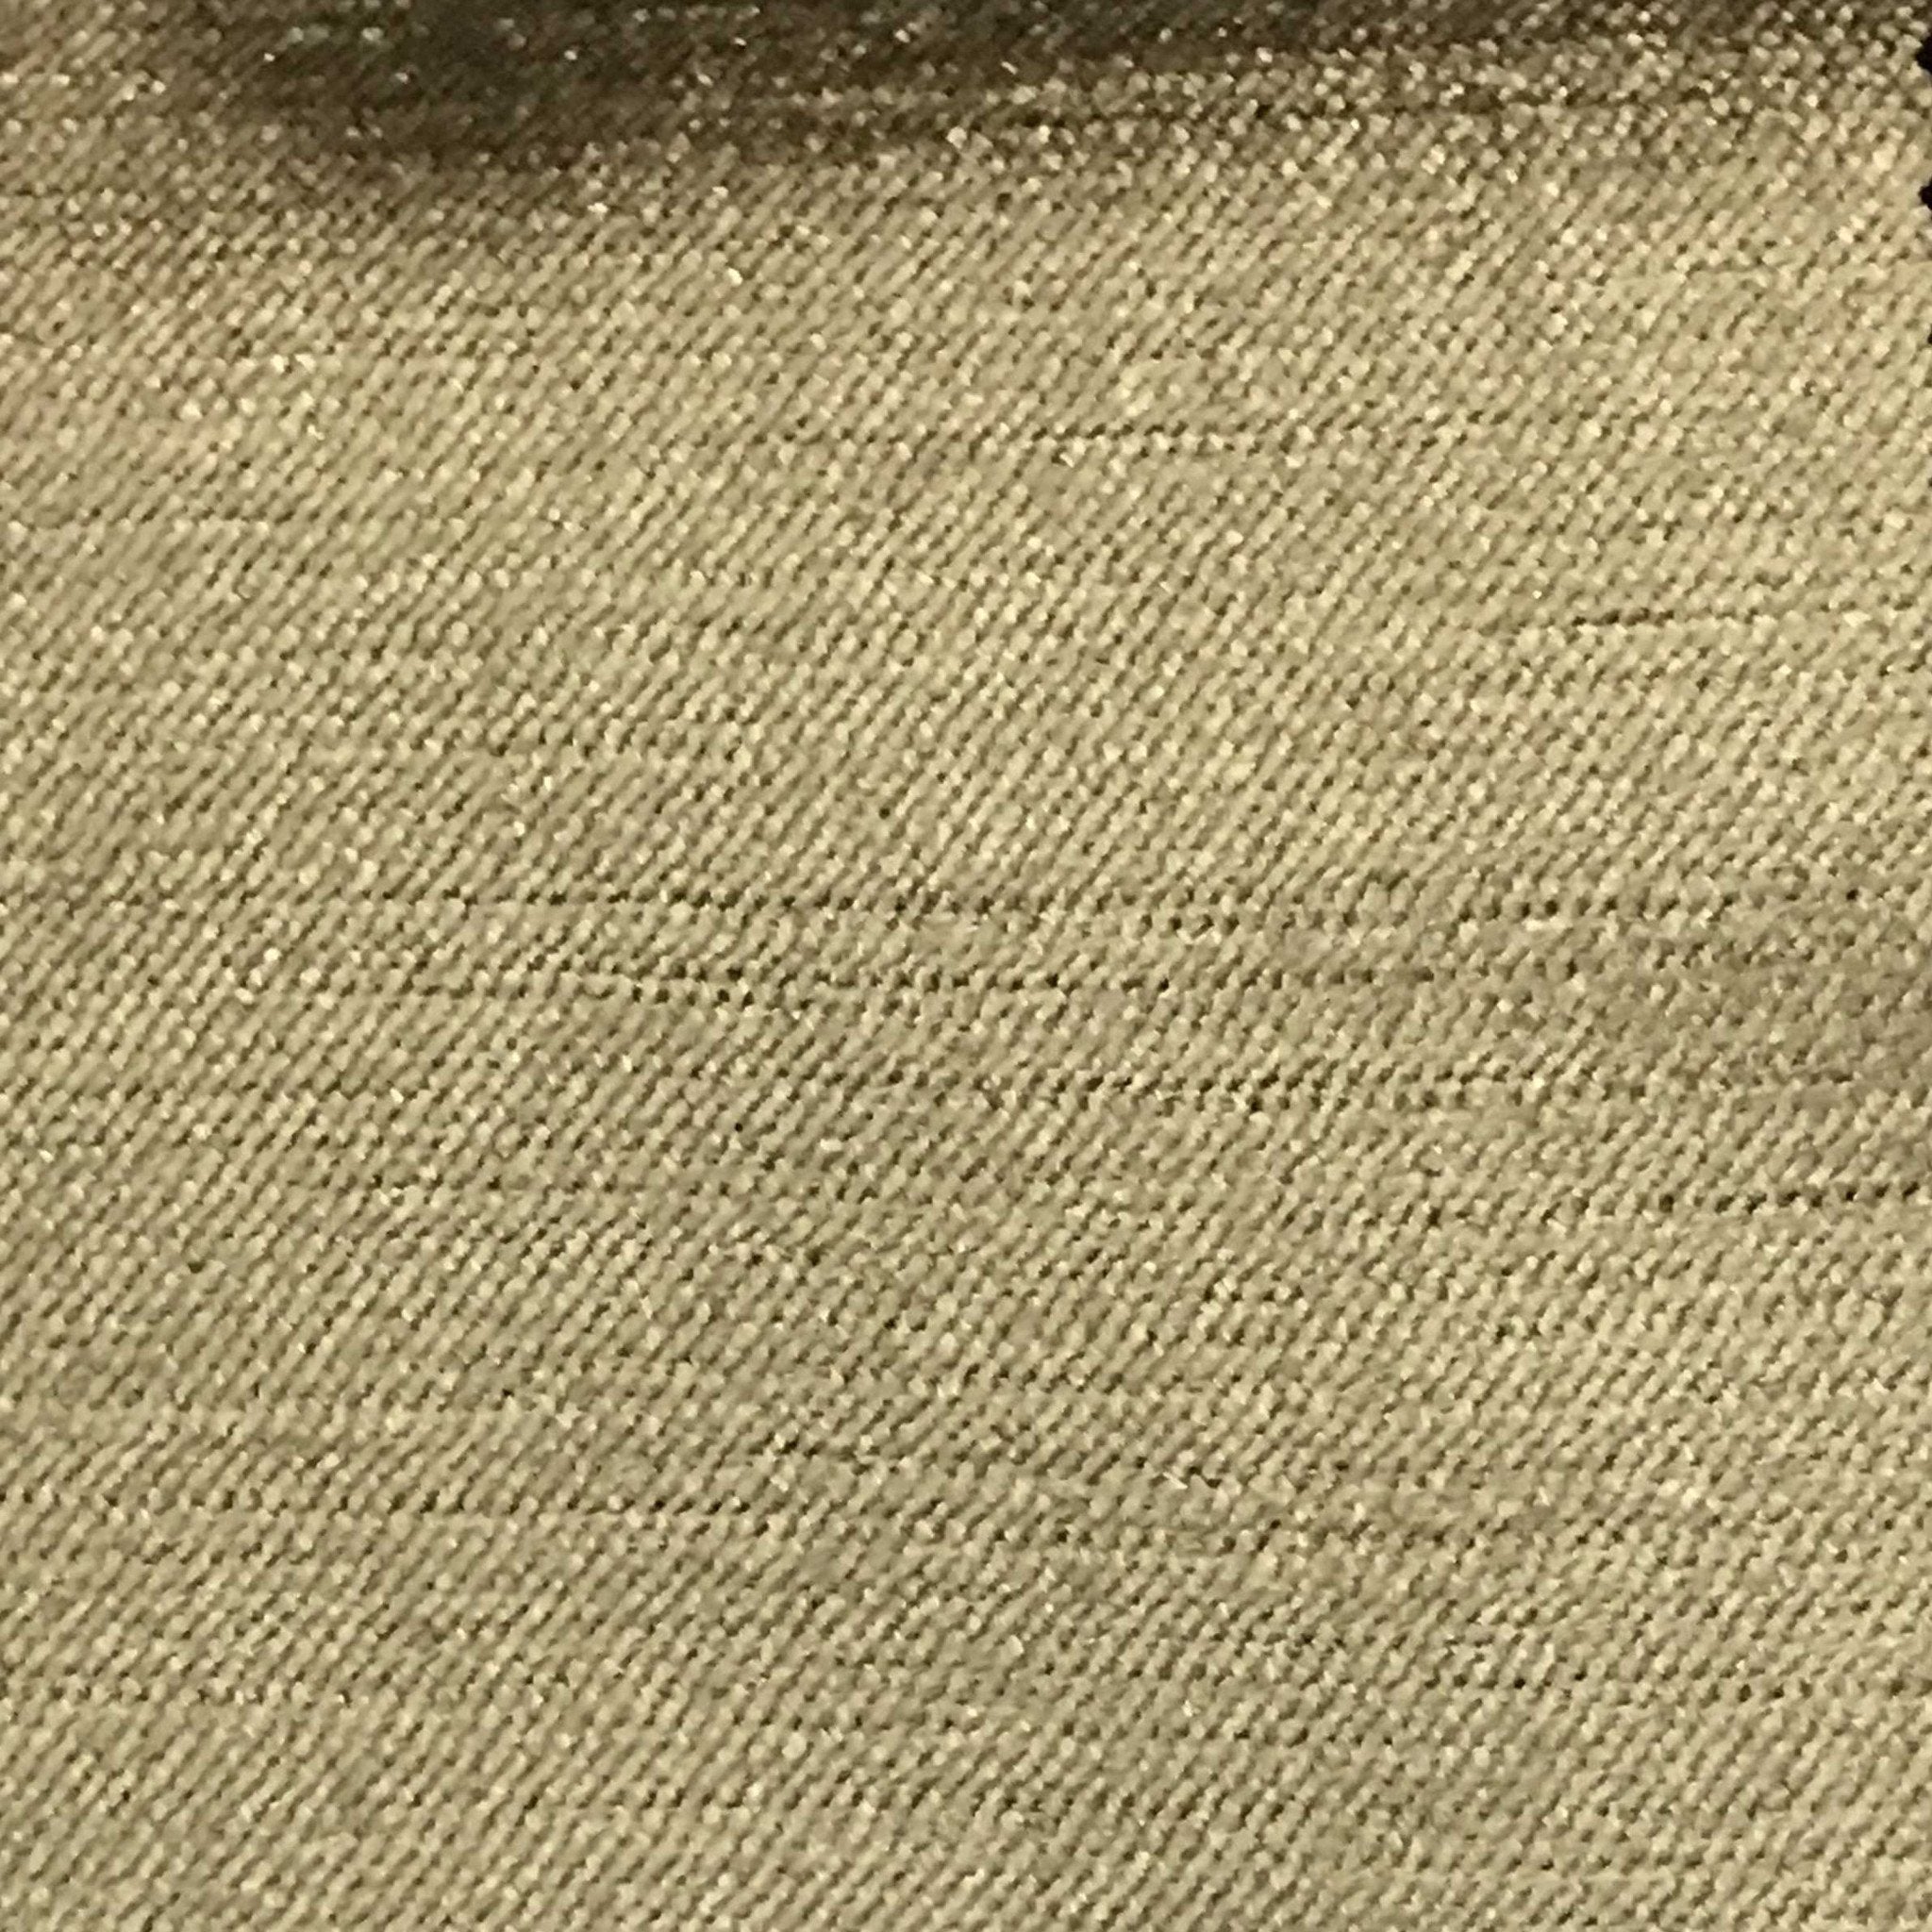 Khaki Solid Texture Velvet Upholstery Fabric by the Yard